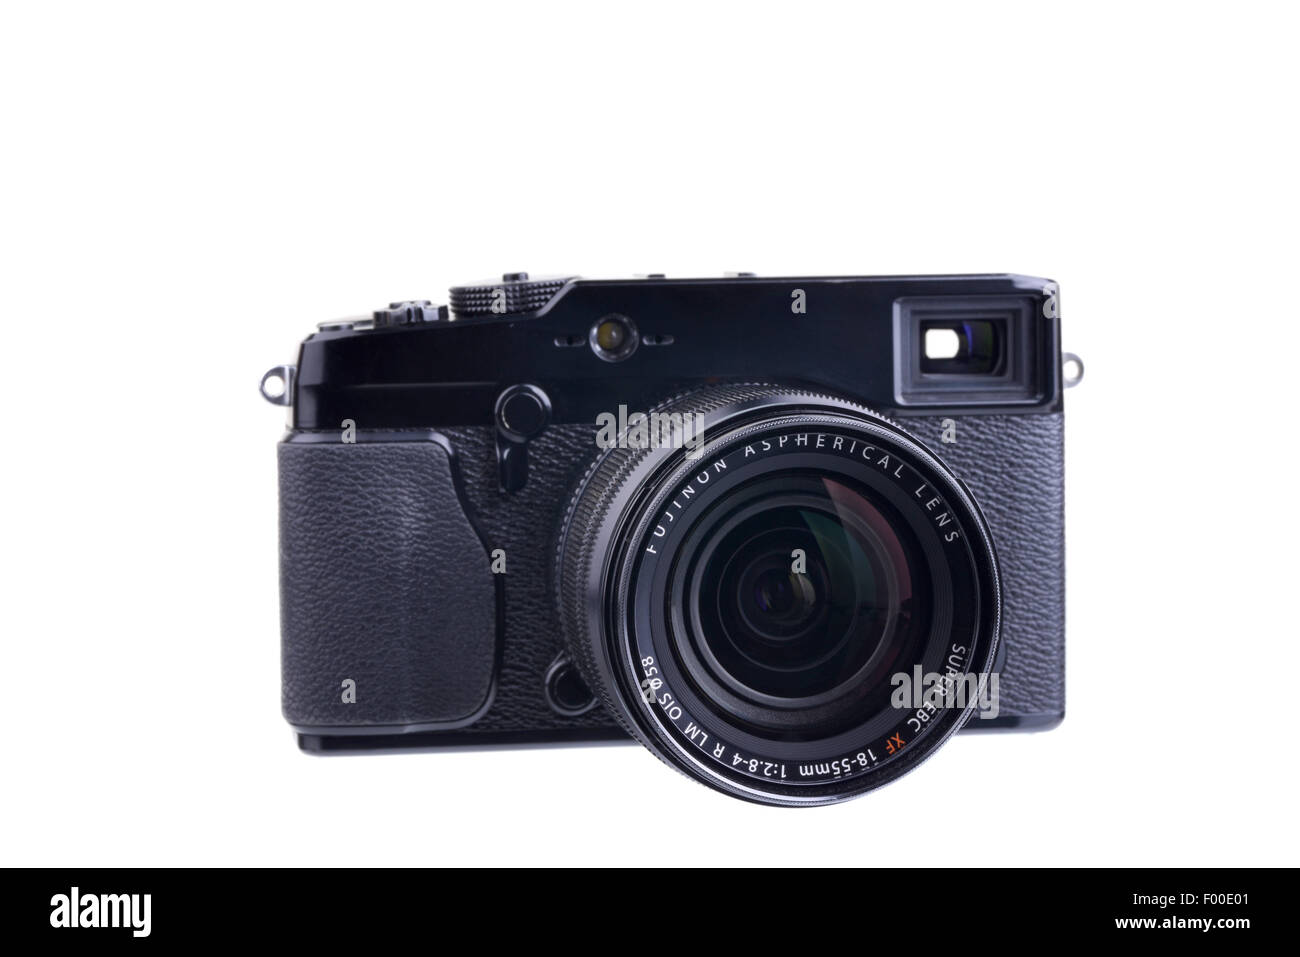 PANAMA, PANAMA - AUGUST 4, 2015:  The Fujifilm X-Pro1 is a mirrorless interchangeable-lens digital camera announced in January 2 Stock Photo